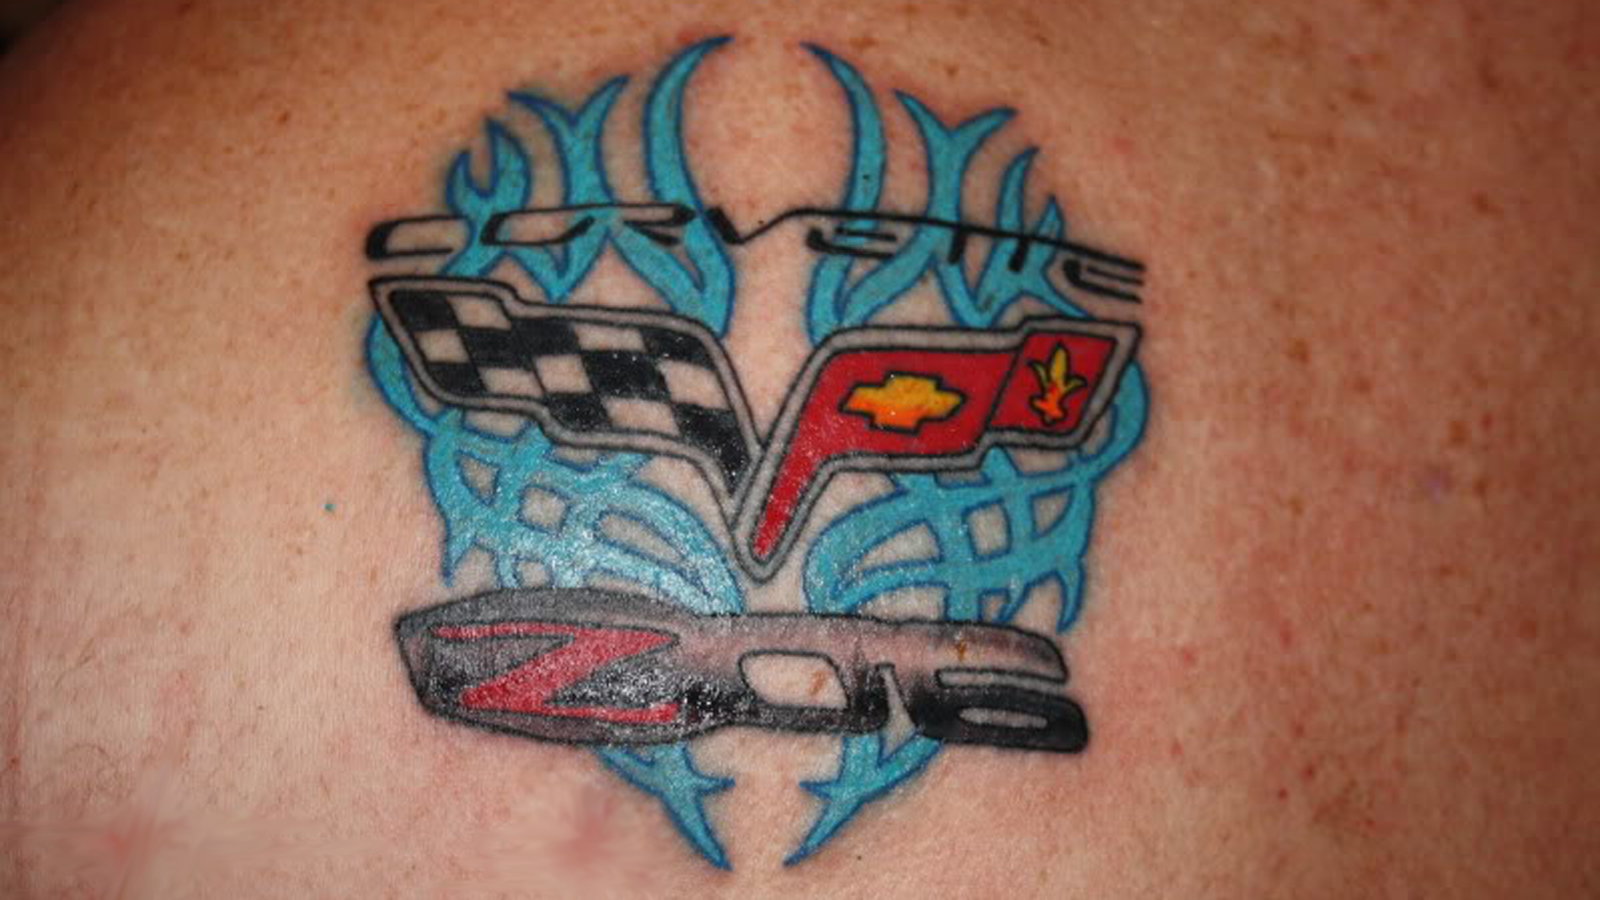 a tattoo of delorean from back to the future, | Stable Diffusion